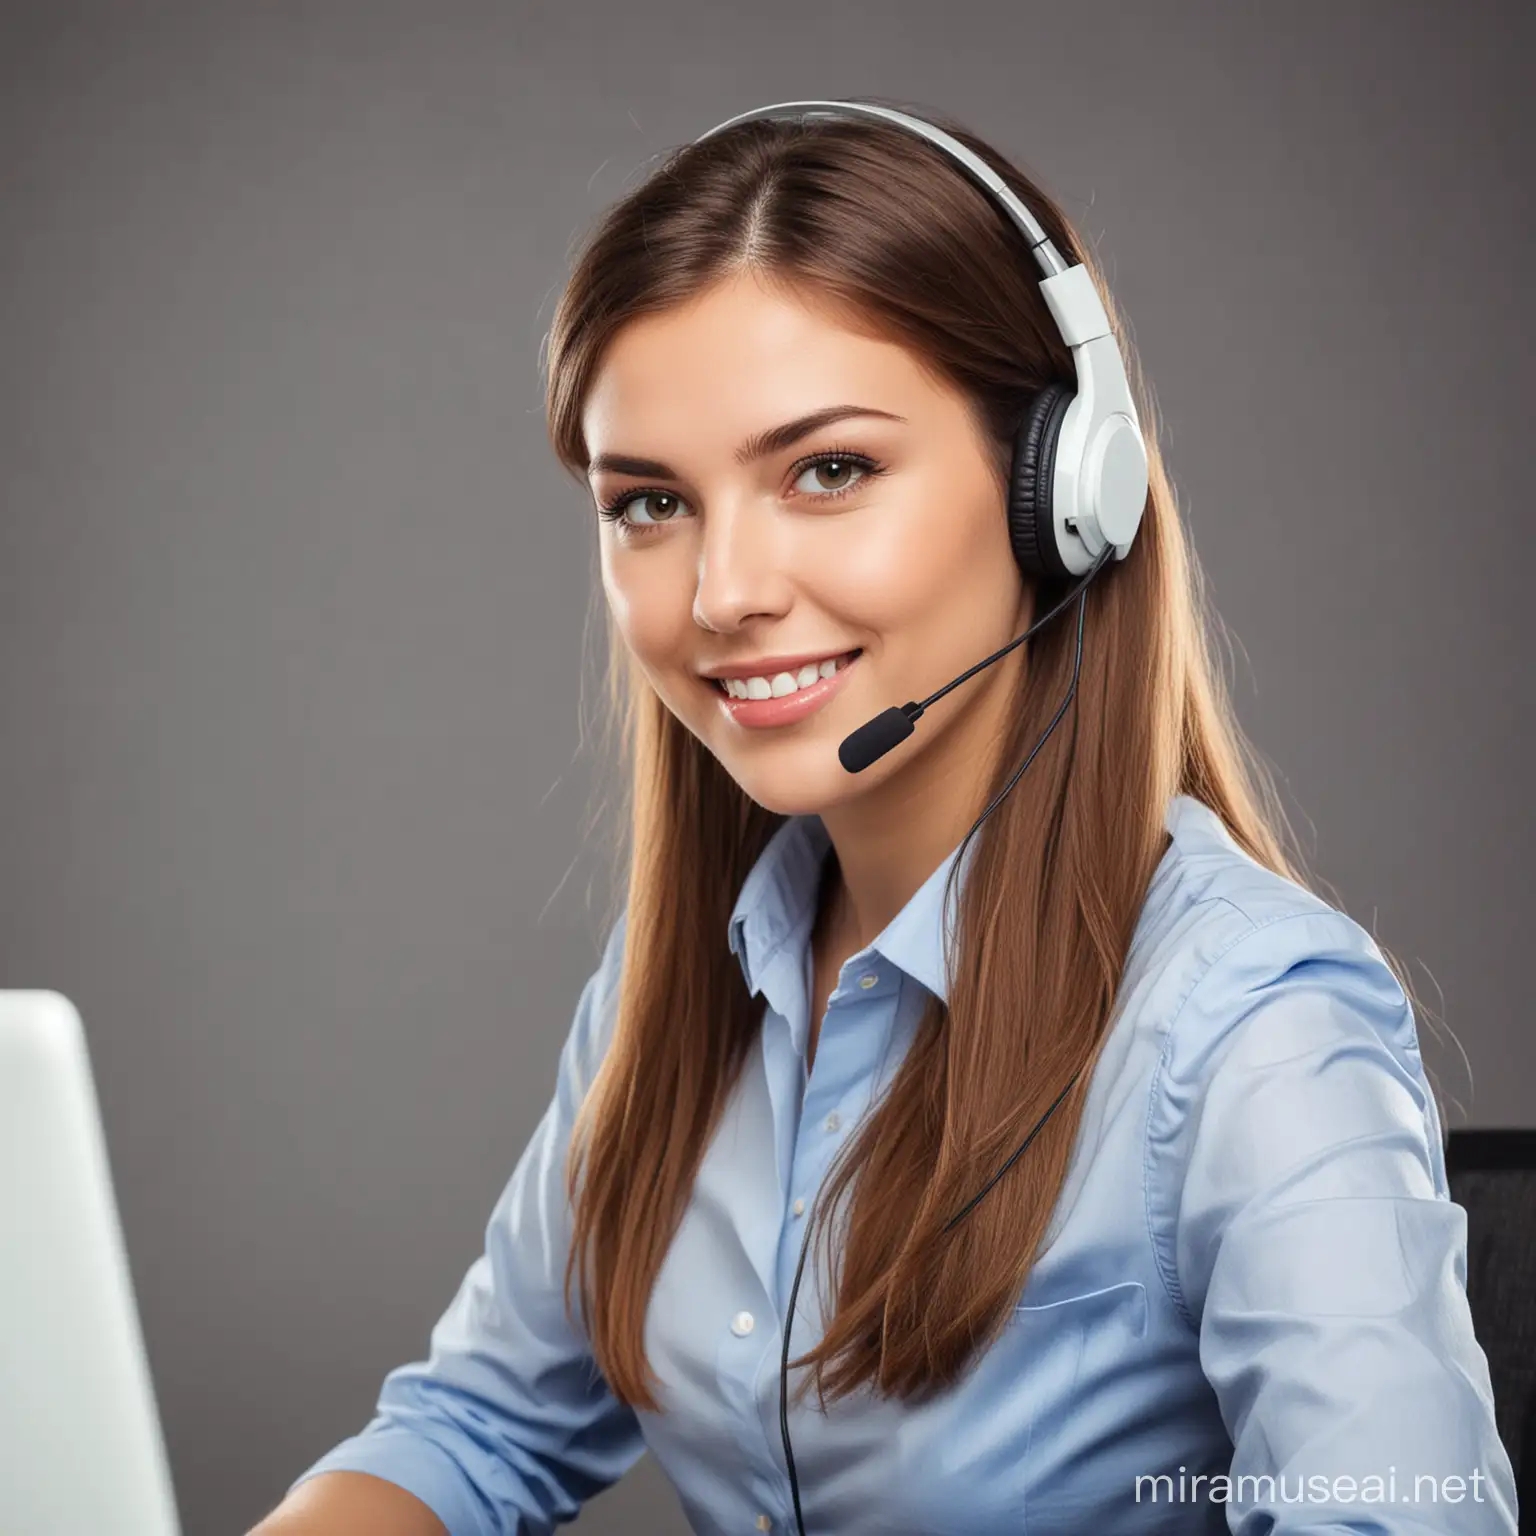 Professional Female Call Center Operator with Headset